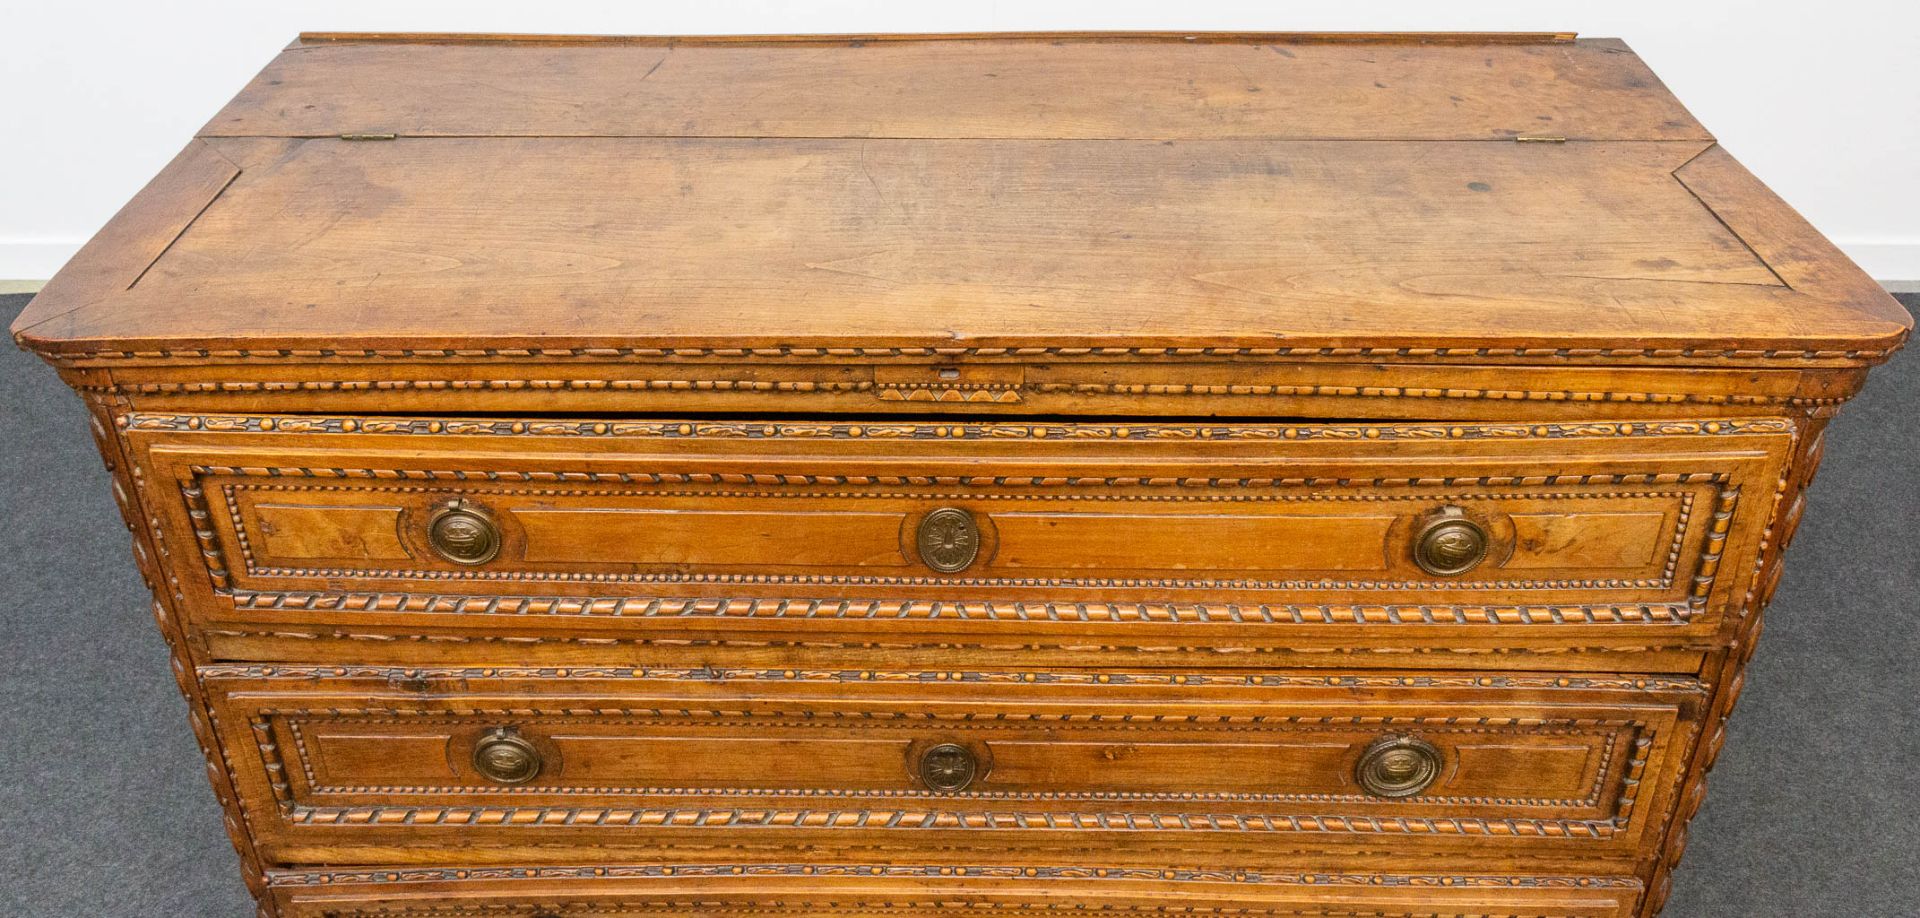 A wood sculptured commode in Louis XVI style, with 3 drawers and a hidden desk. 18th century. - Image 20 of 23